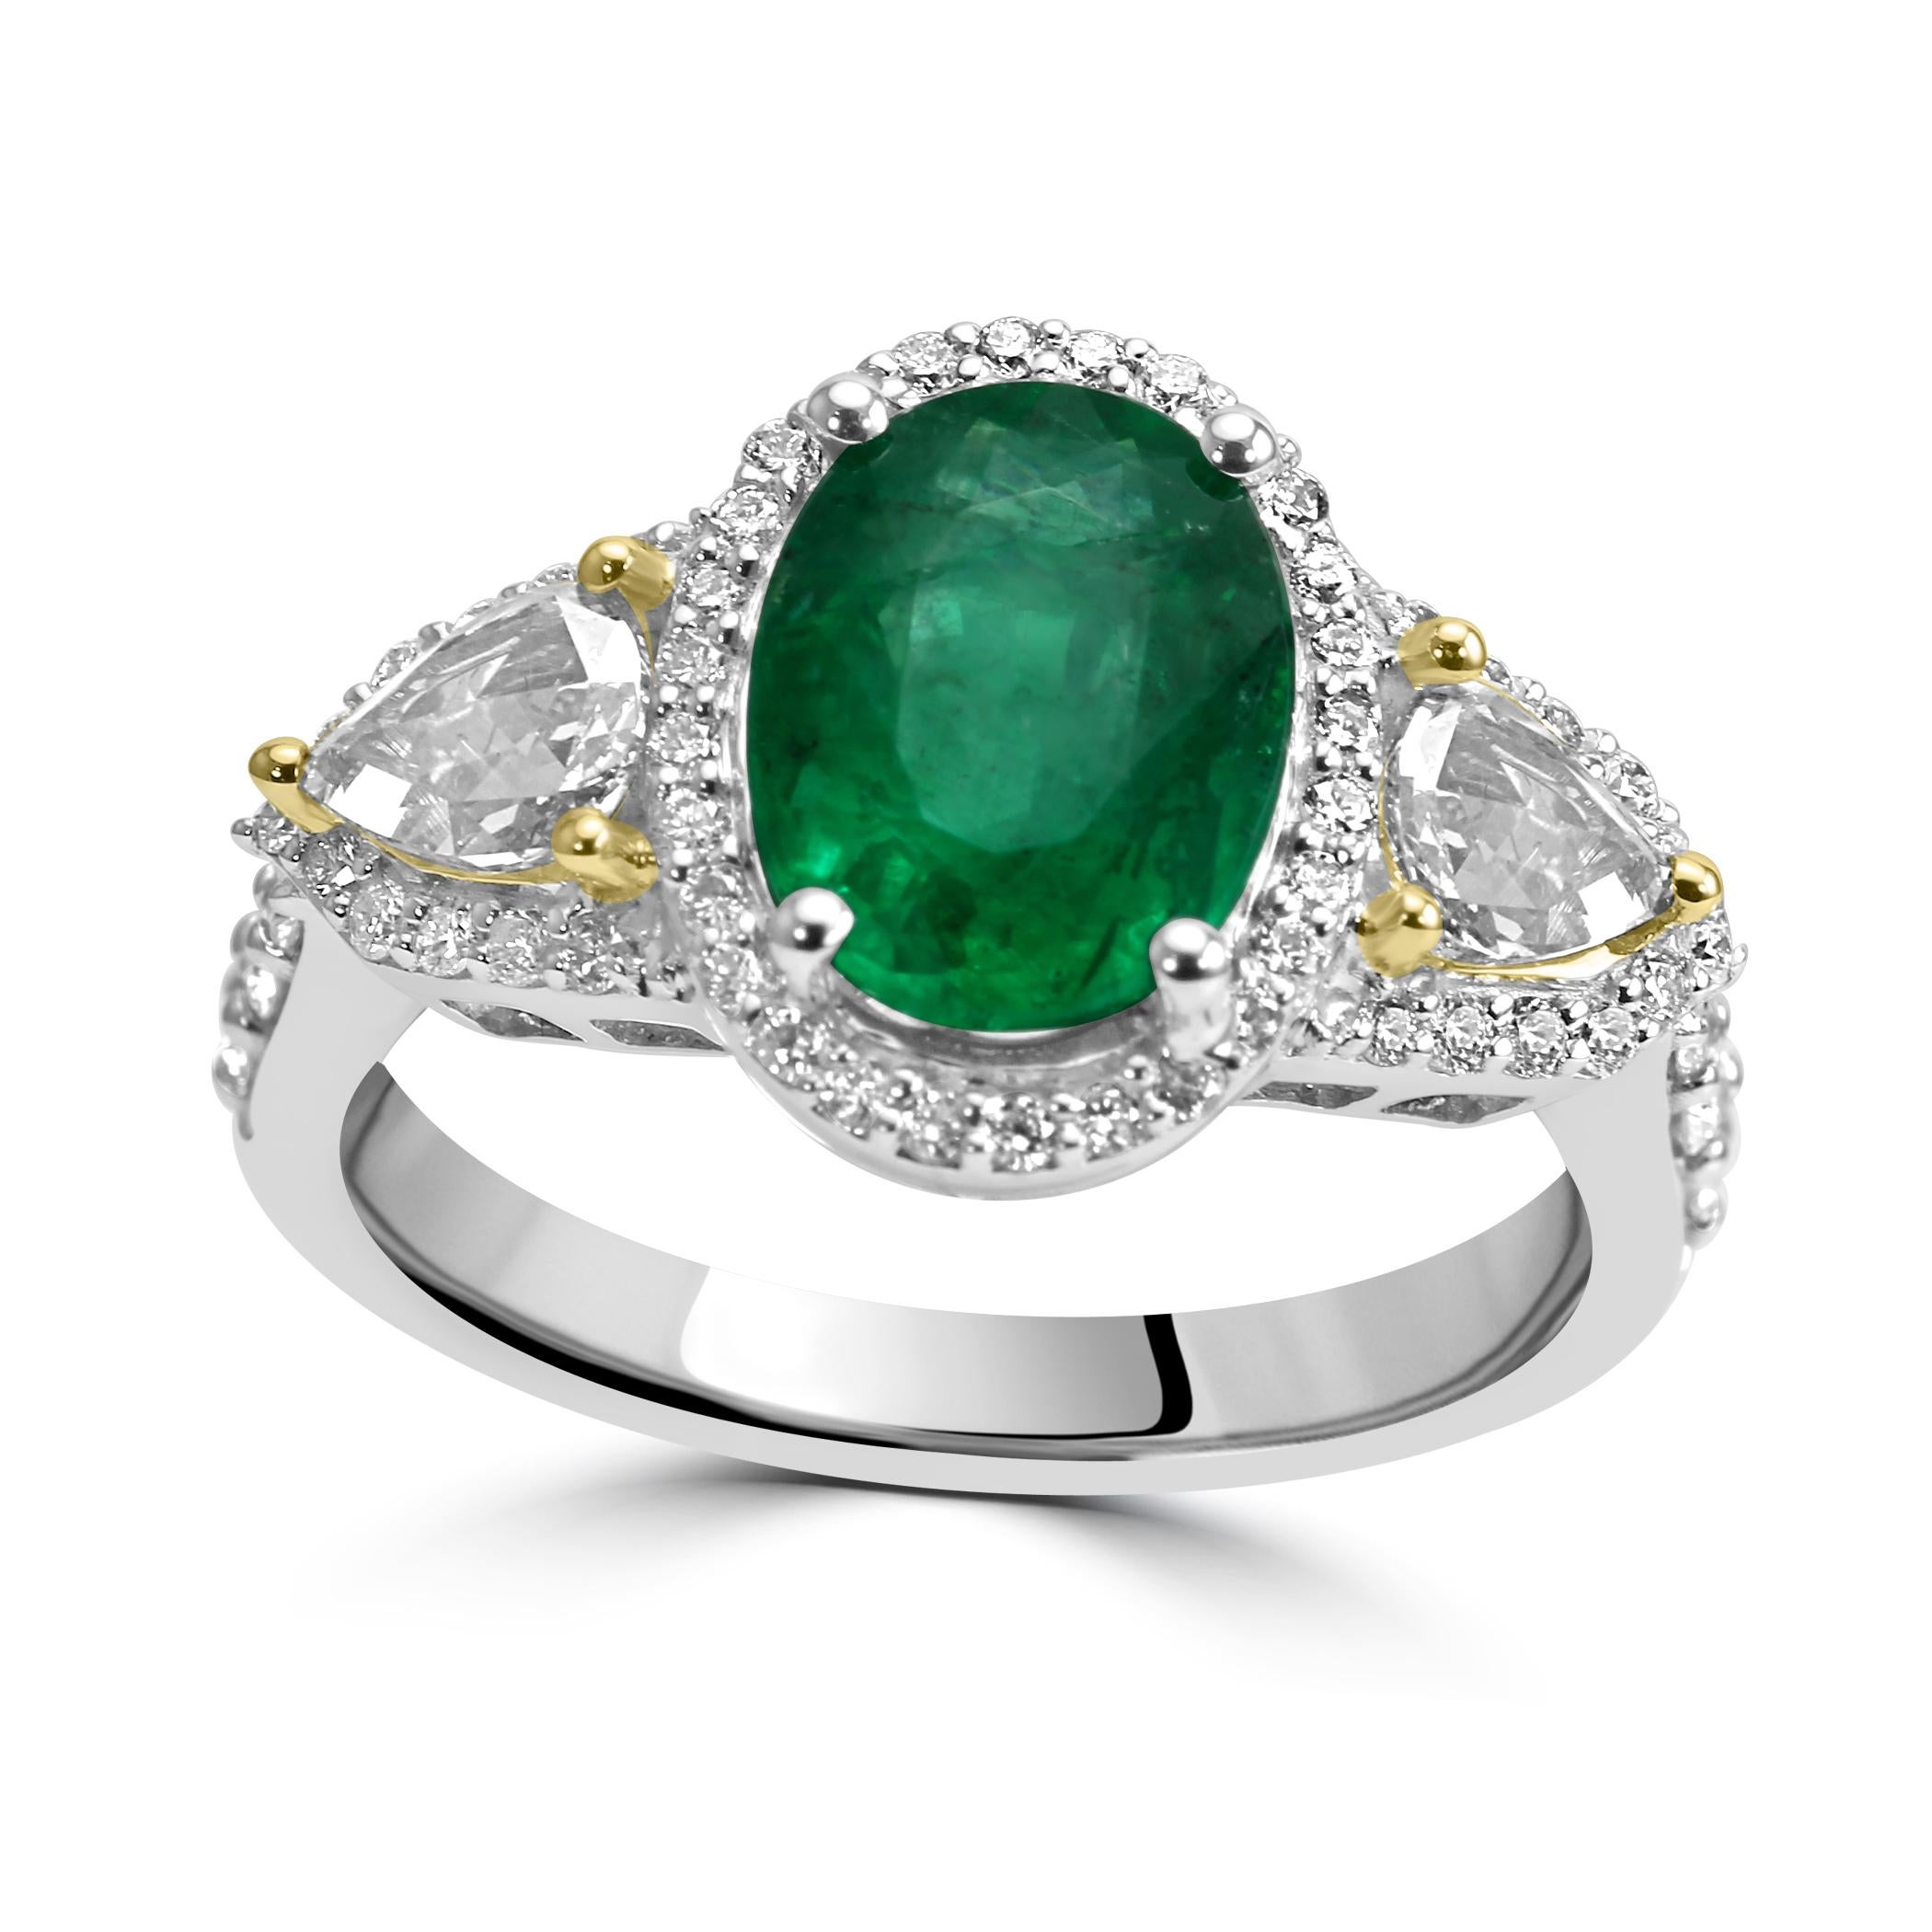 This Emerald ring is a dazzling showcase of natural beauty and exceptional craftsmanship.

At its heart is a jaw dropping Oval-Shaped Emerald, weighing at 1.95 carats, This ring is a symphony of vibrant color, sparkle, and elegance. 

Surrounding